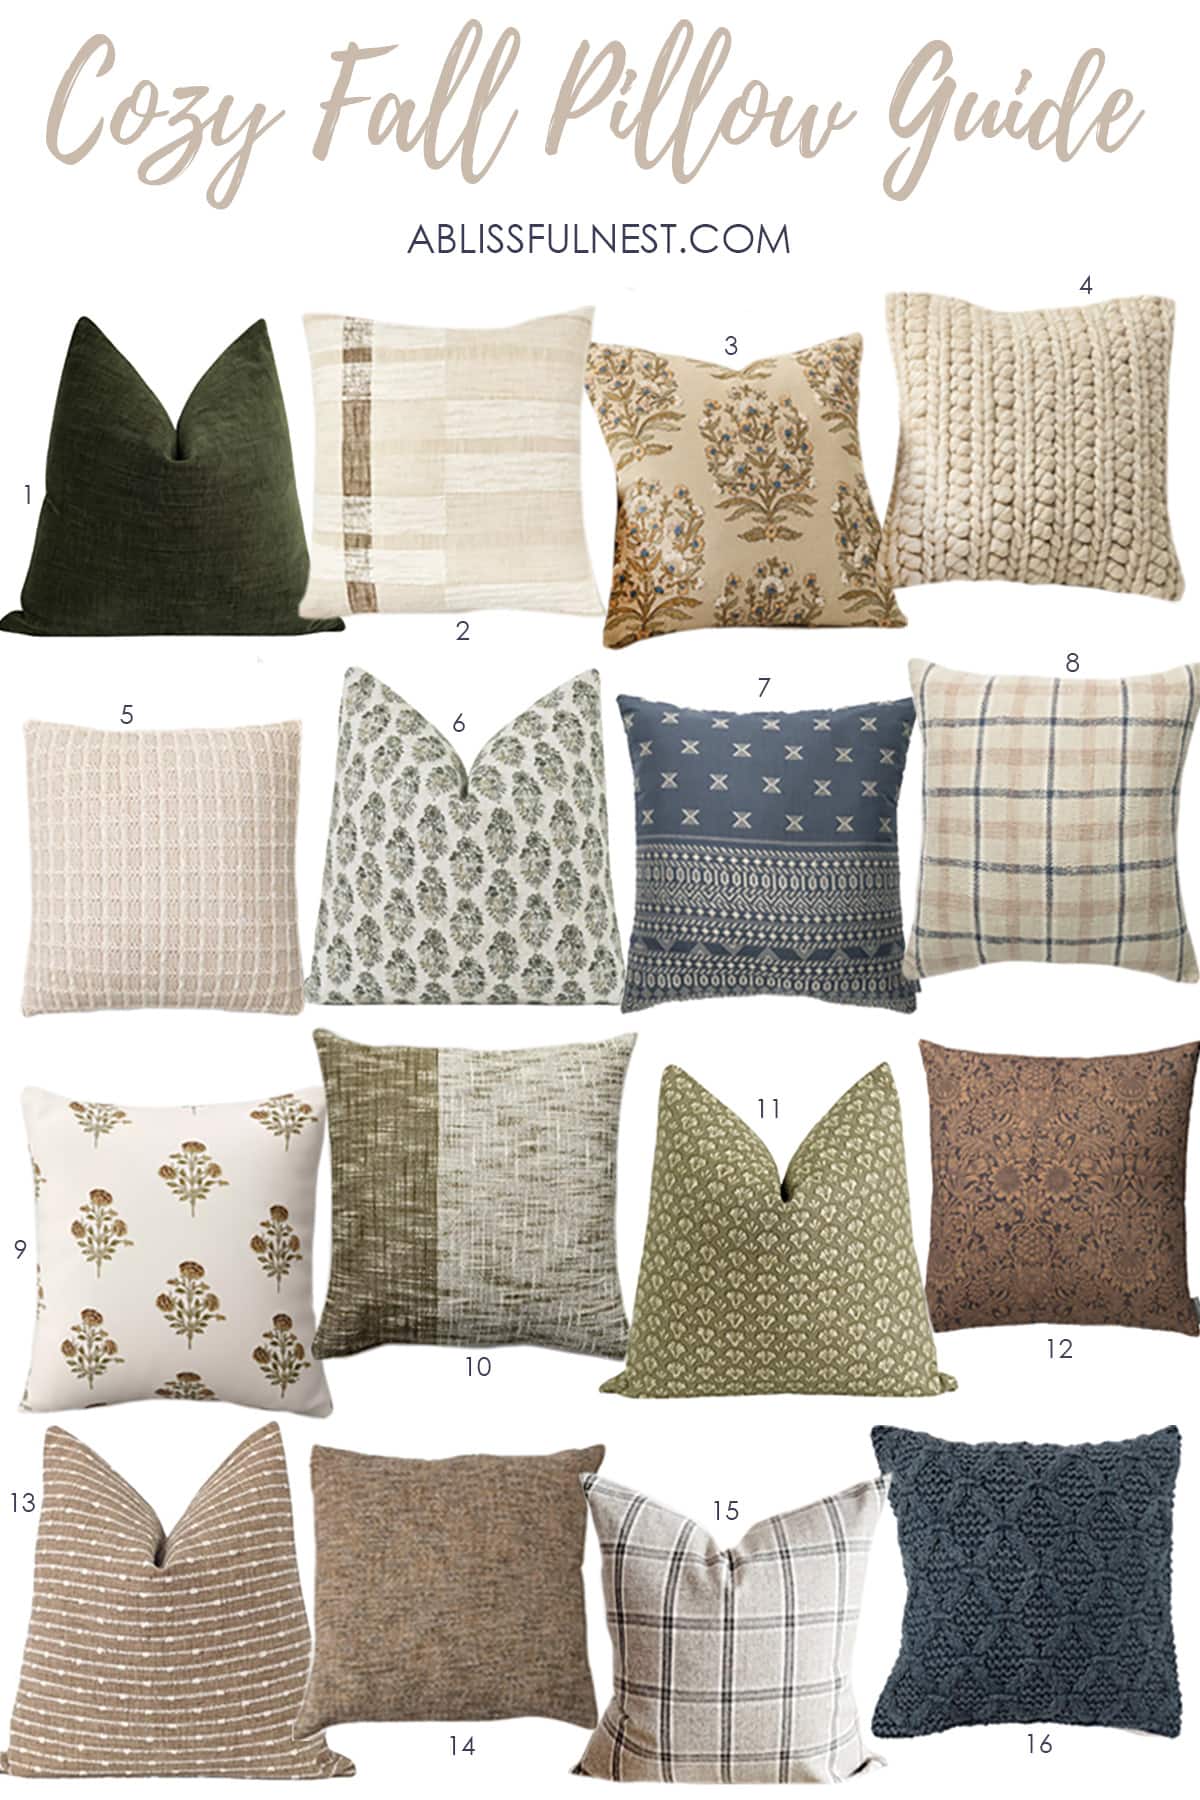 A collection of the BEST fall pillows to decorate with for the season. #ABlissfulNest #falldecor #fallideas